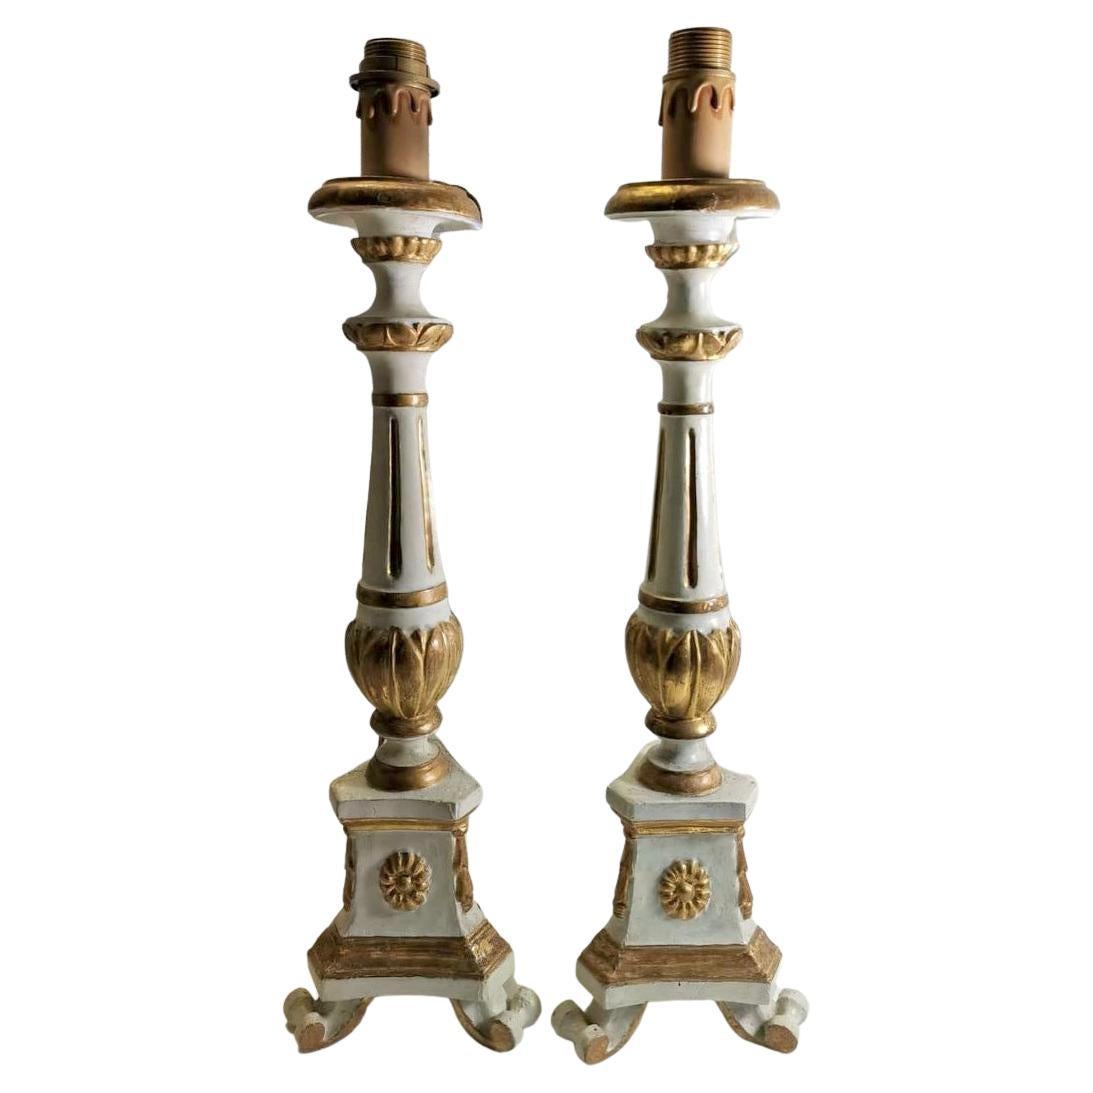 Pair of Italian Altar Candelabra in Carved Wood, Lacquered and Gilded